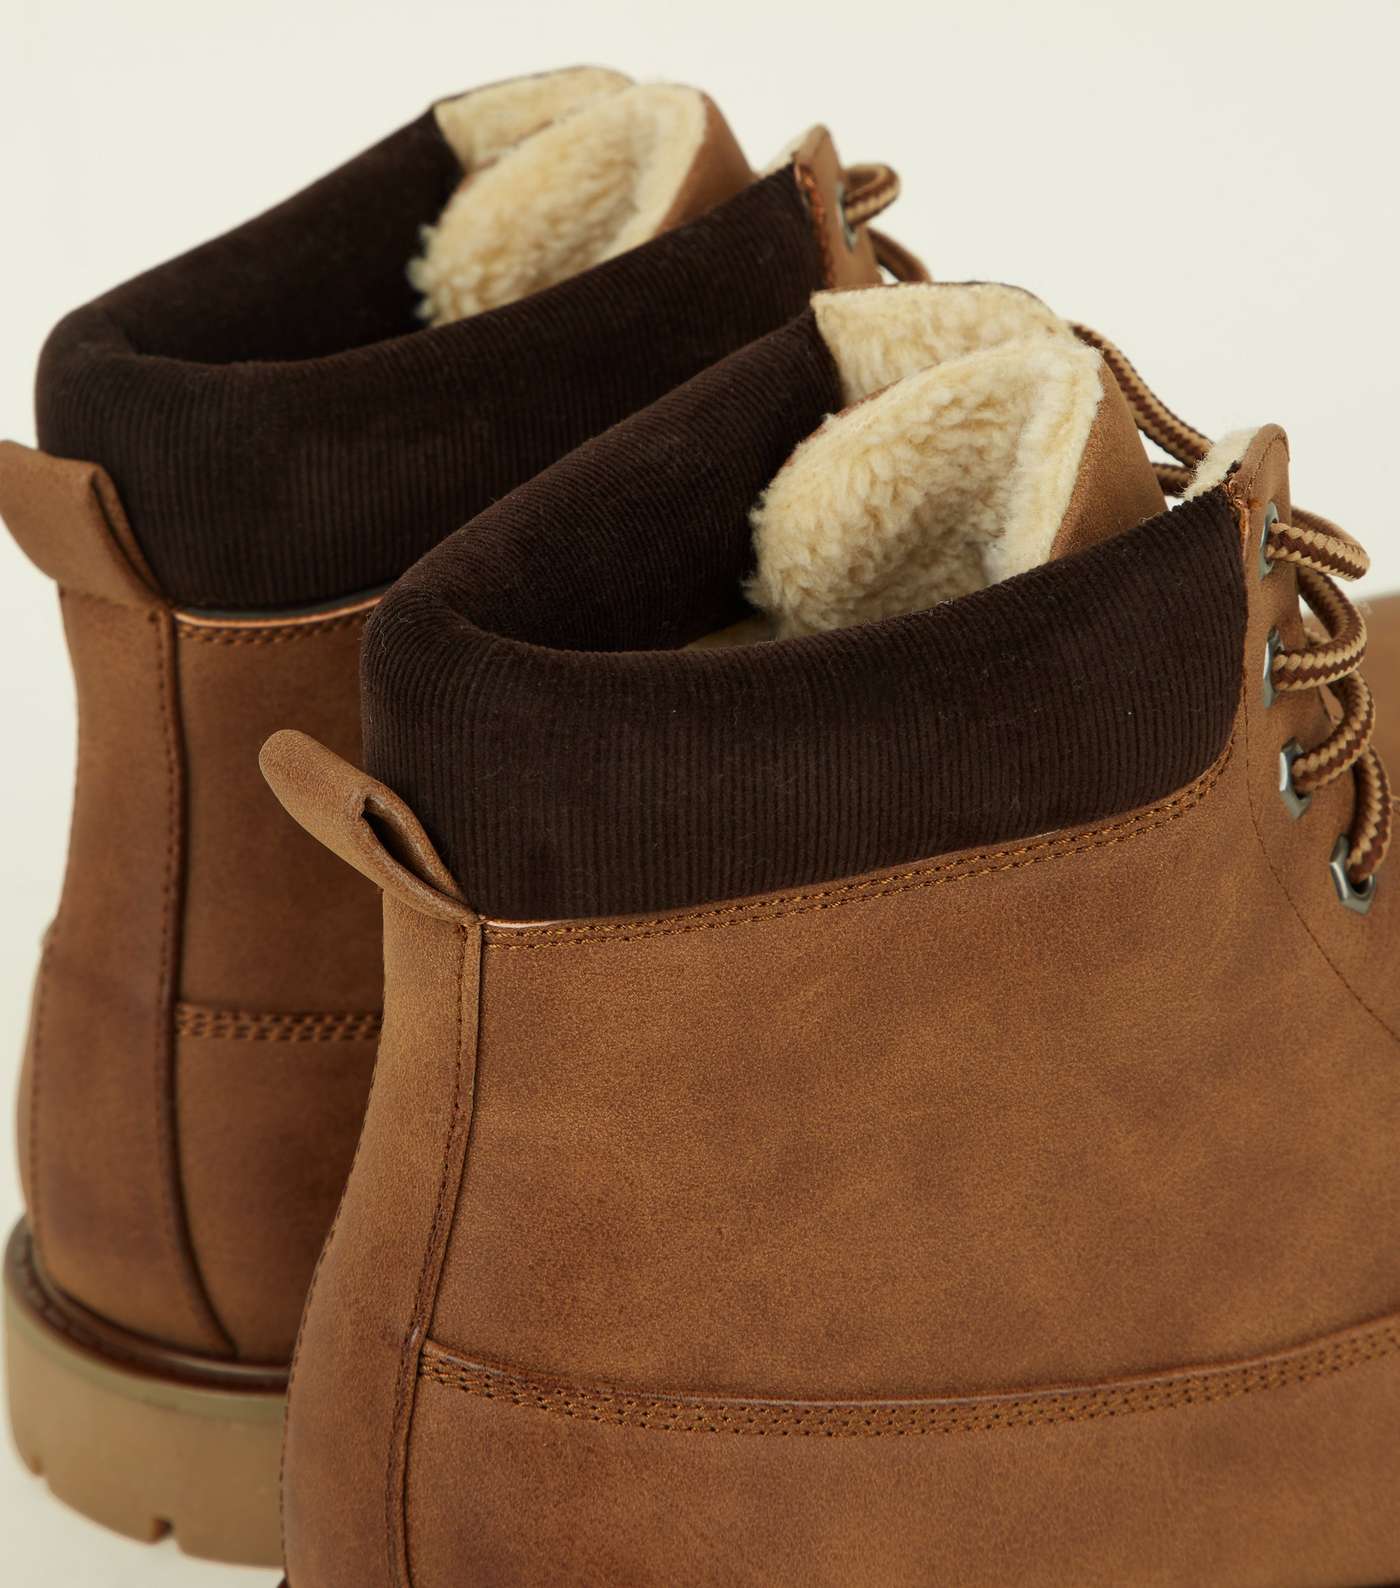 Tan Corduroy Trim Borg Lined Worker Boots  Image 3